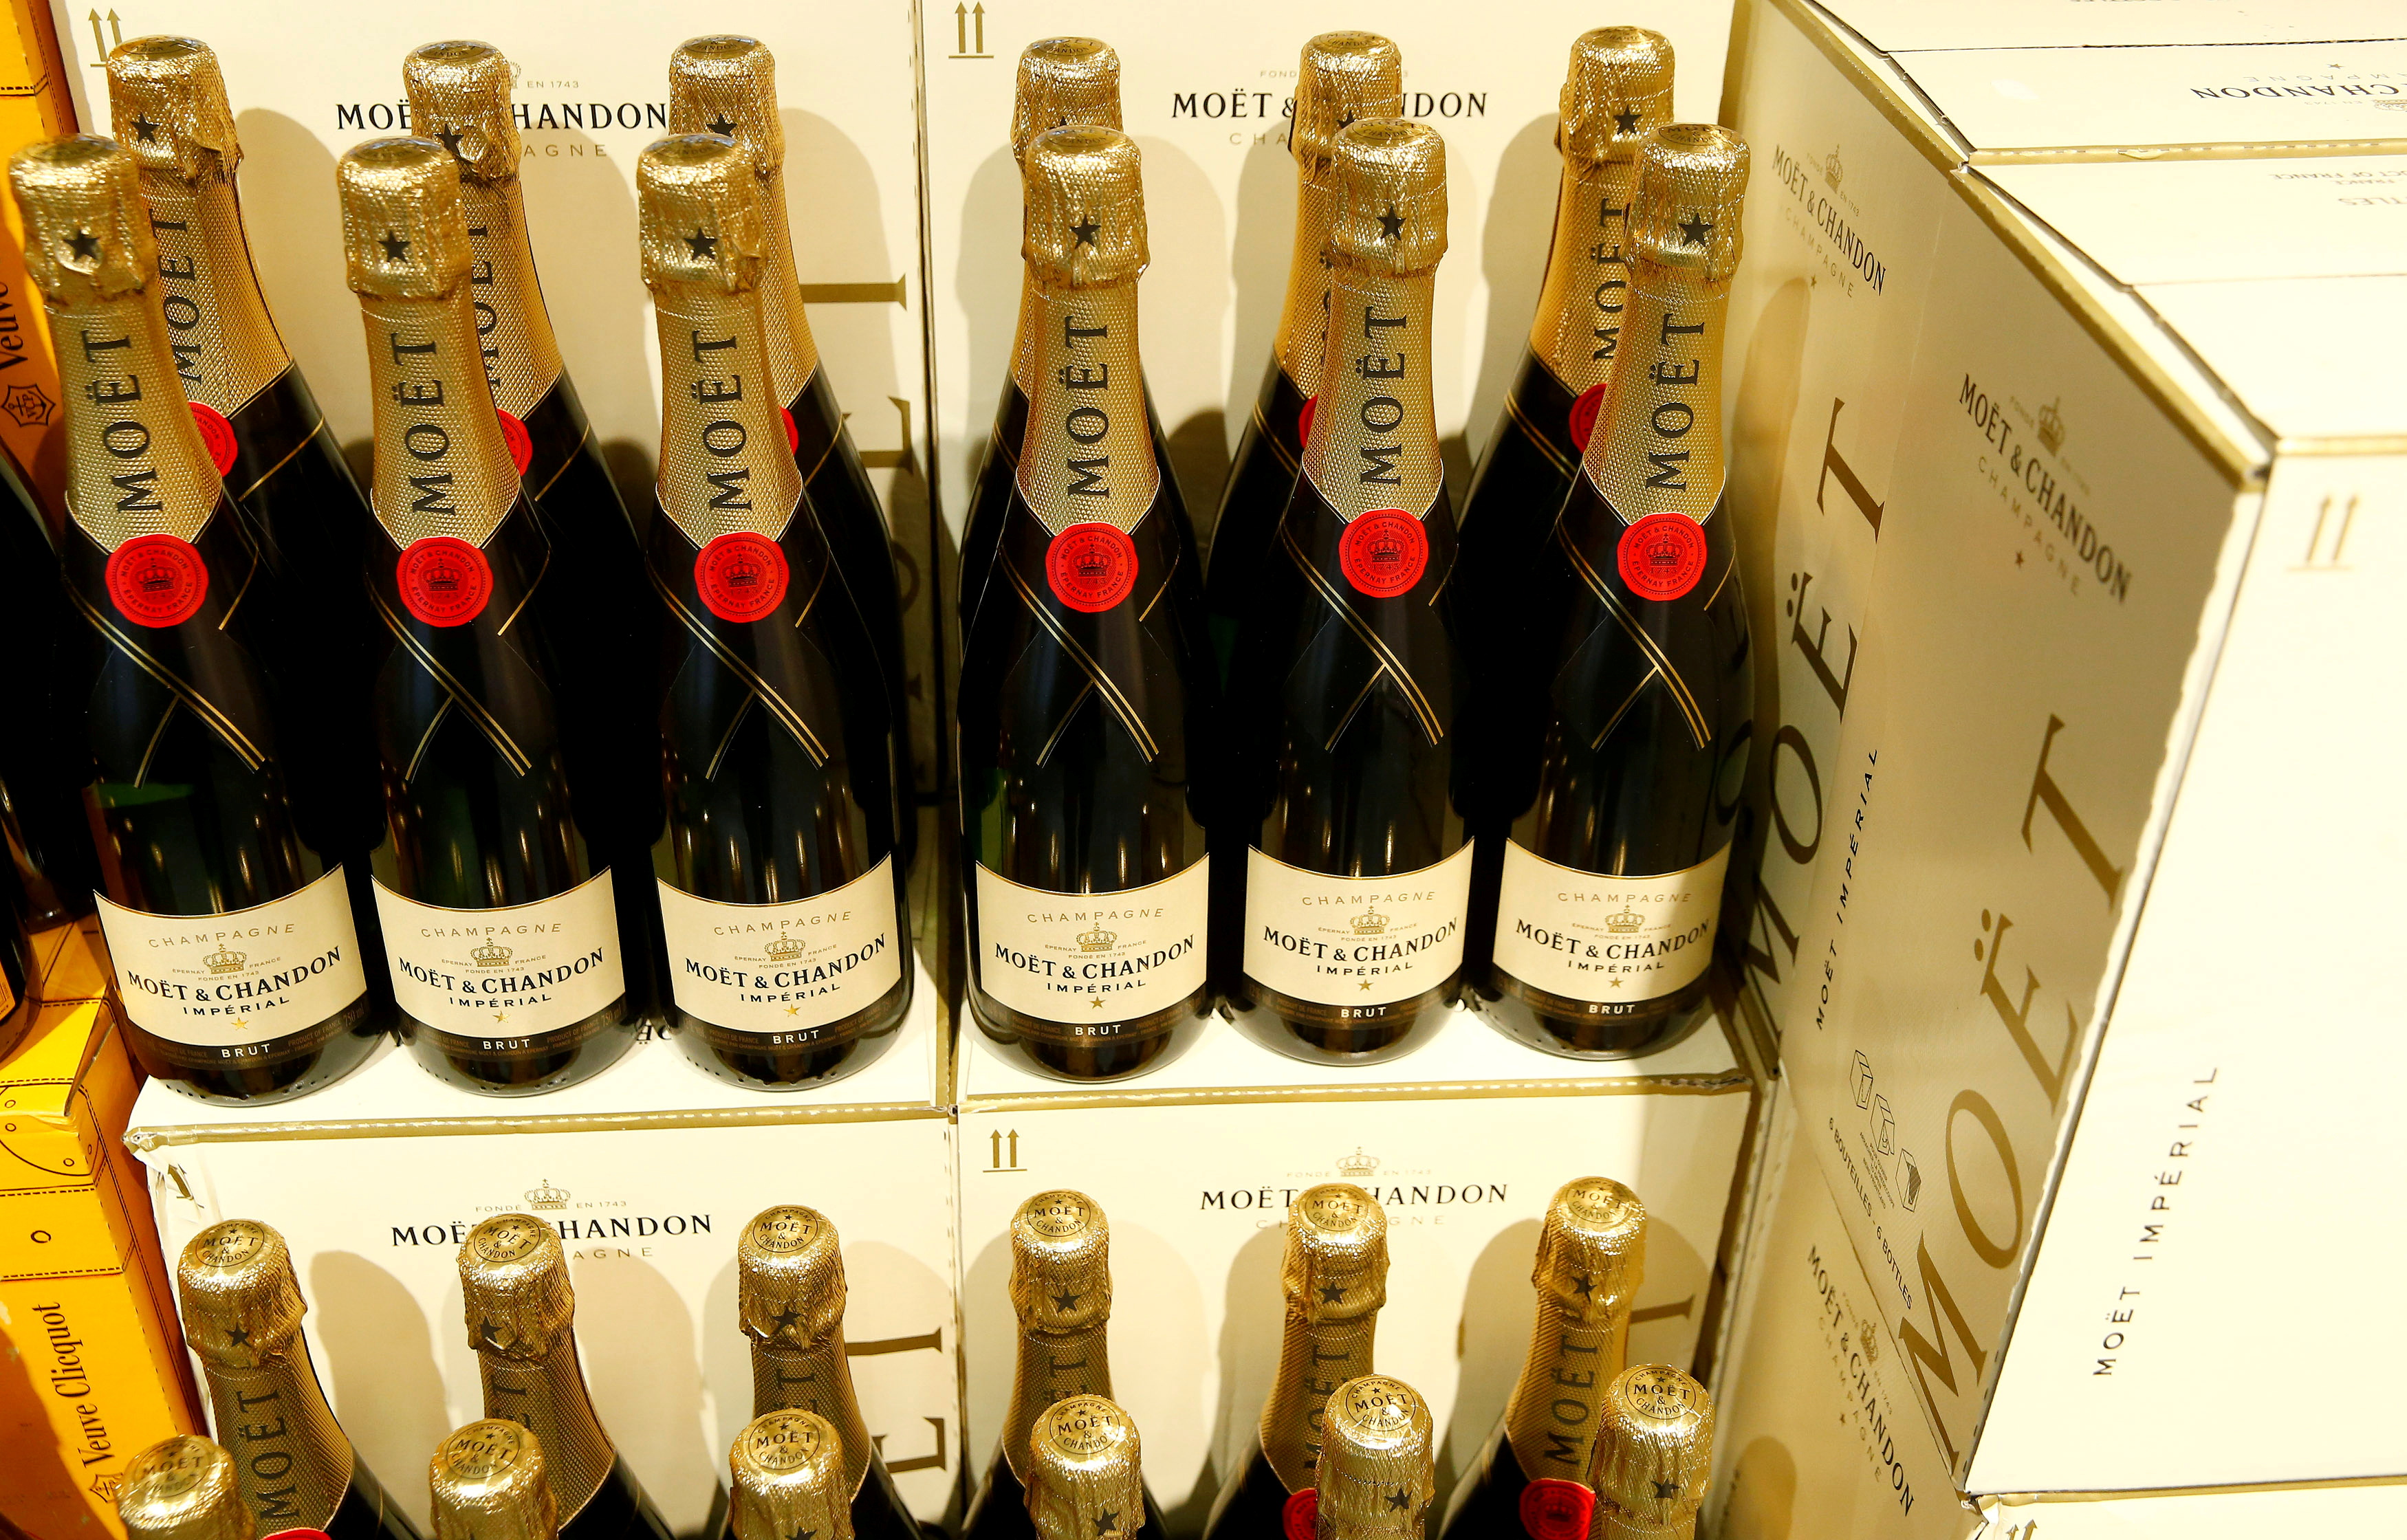 Bottles of French Moet & Chandon champagne are offered at a supermarket of Swiss retail group Coop in Zumikon